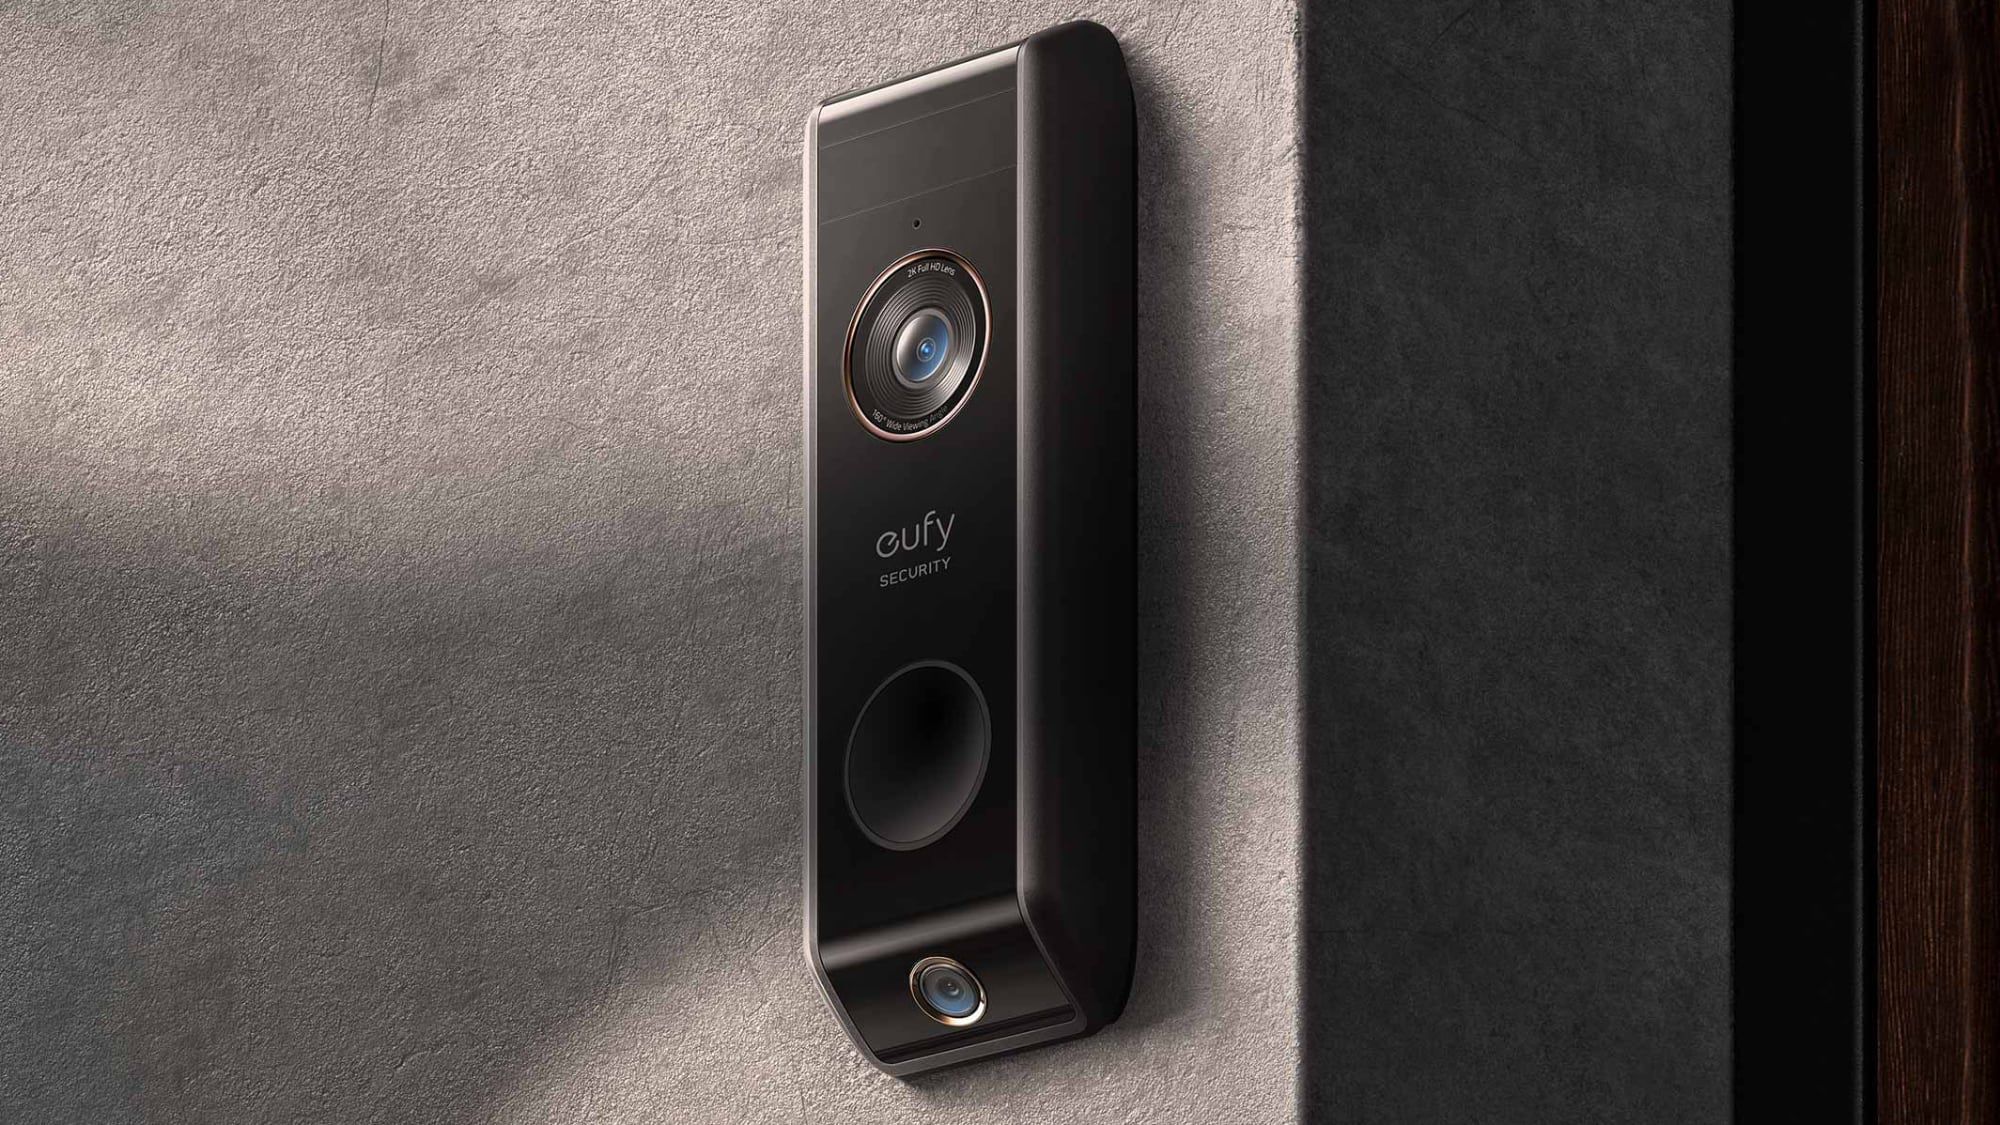 Anker's Eufy Cameras Caught Uploading Content to the Cloud Without User Consent